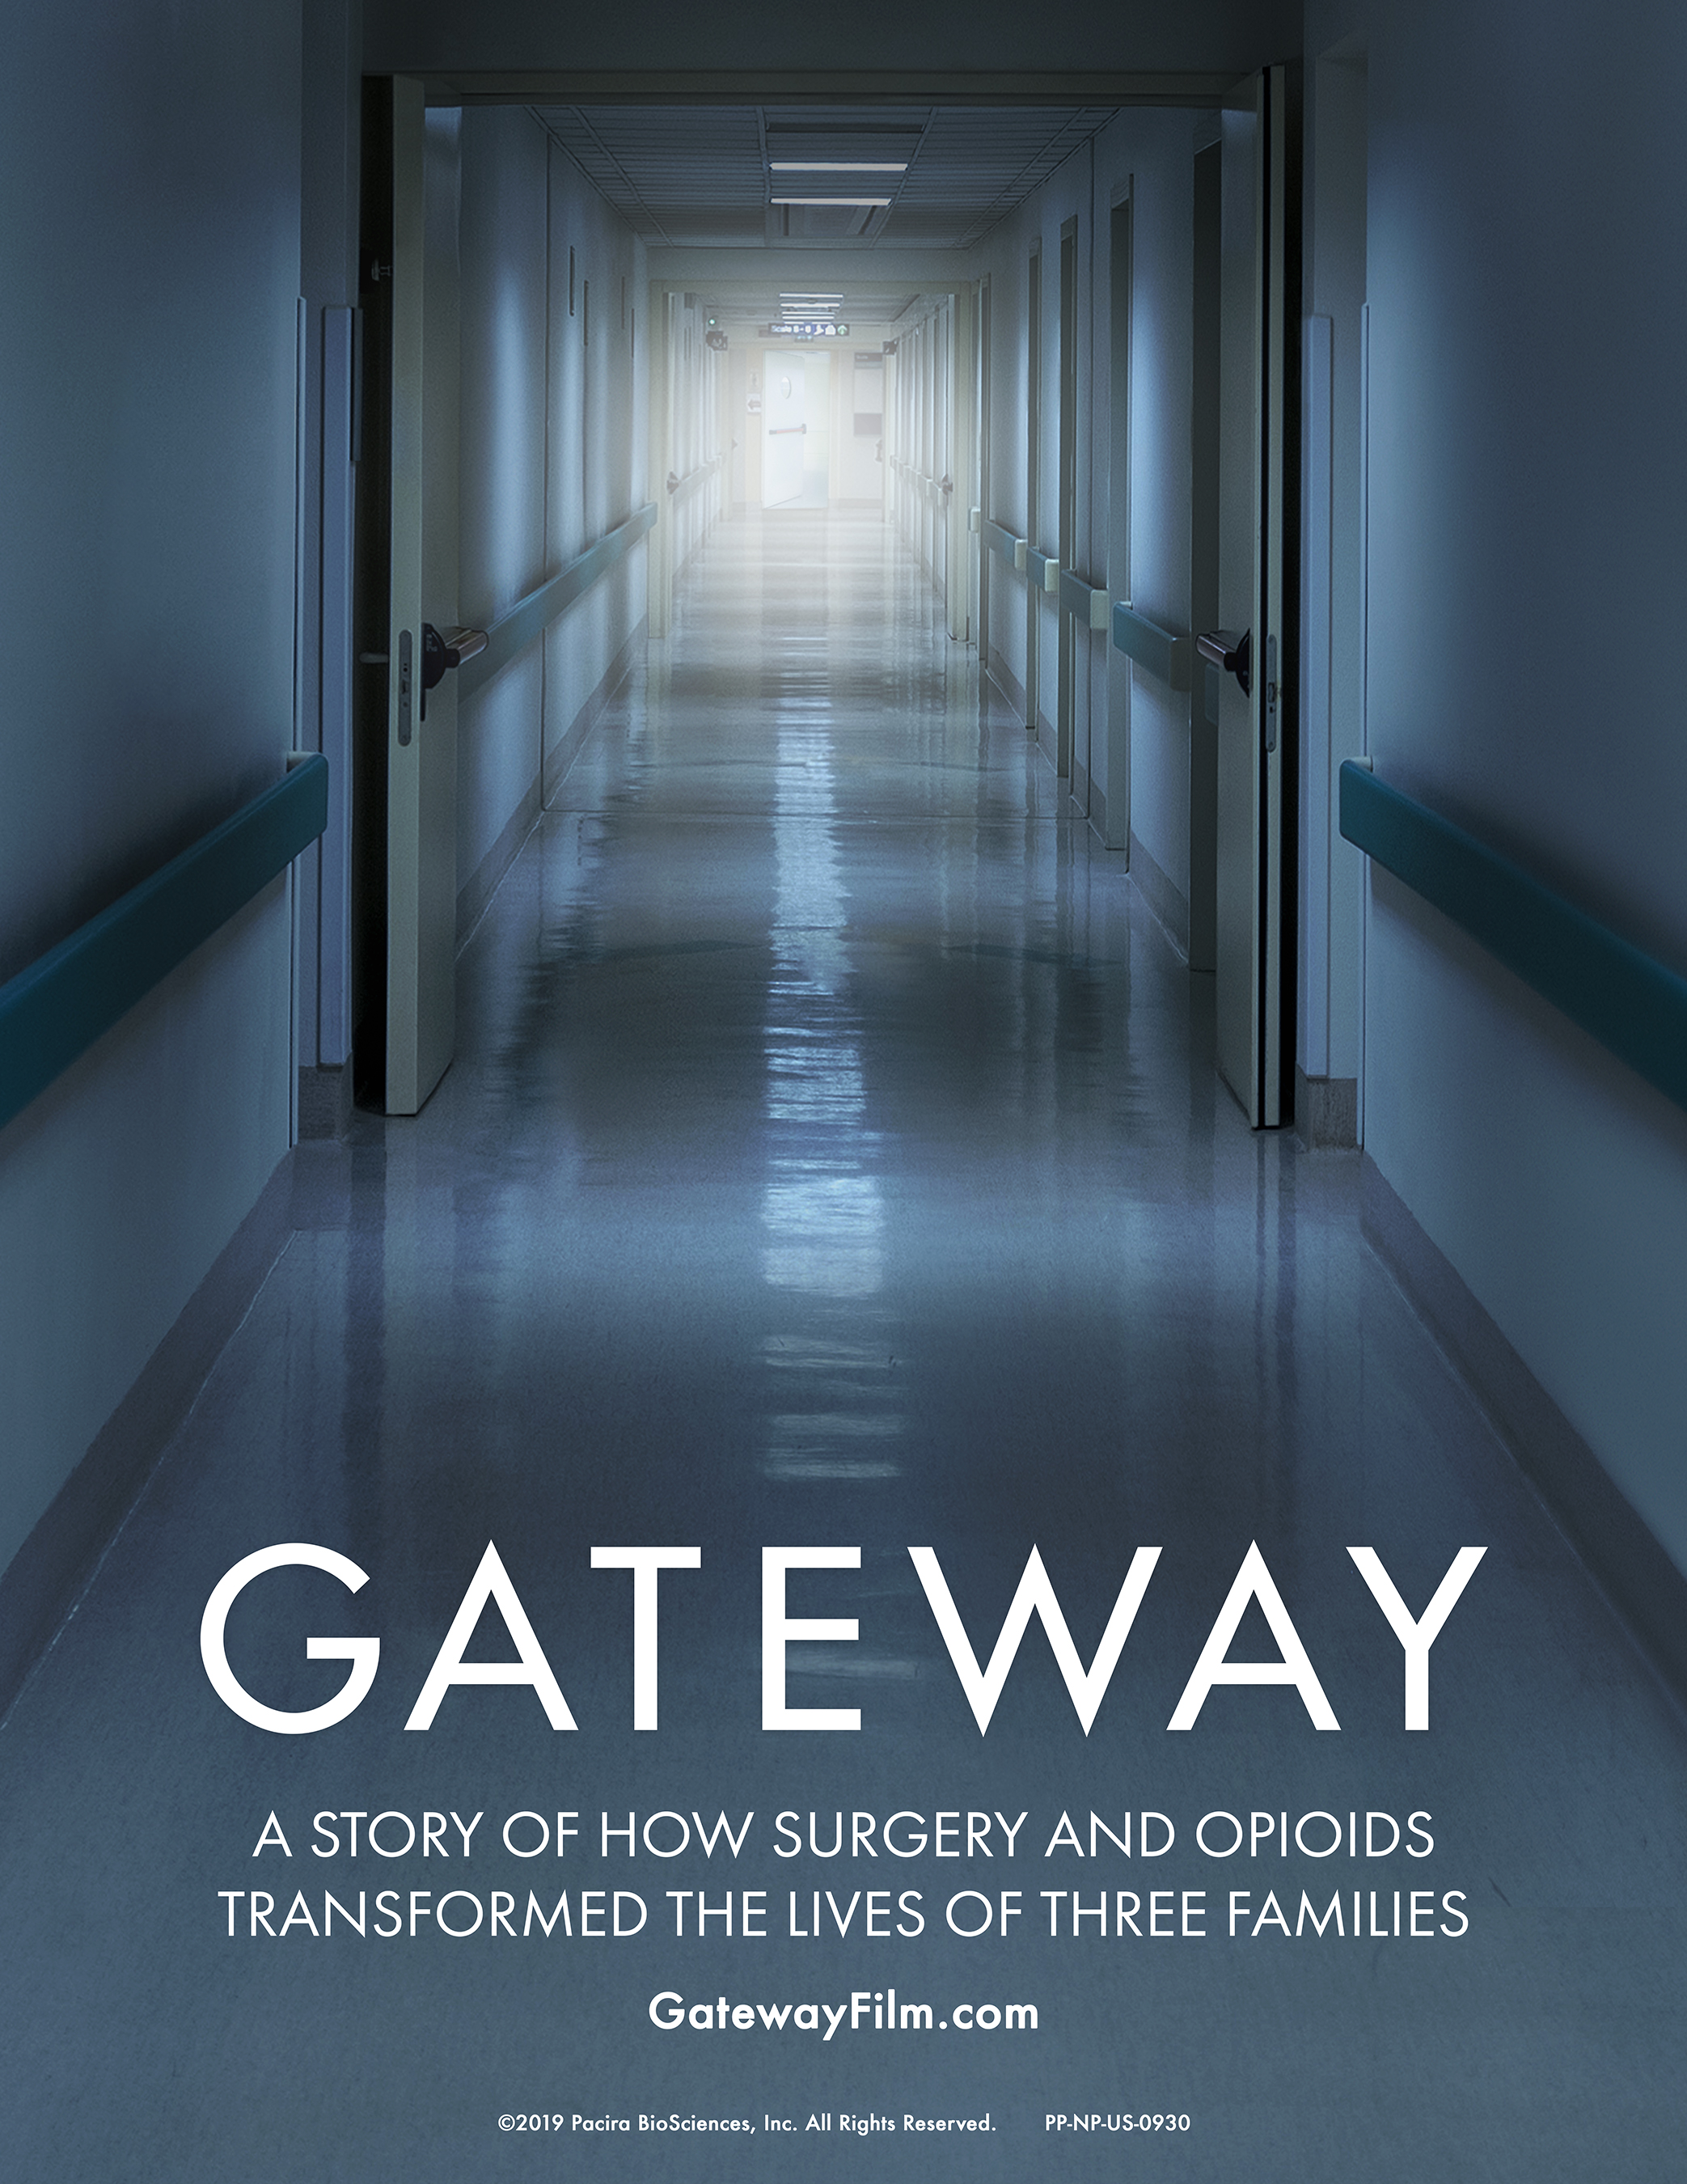 GATEWAY Film Follows Families Impacted by Opioid Addiction After Surgery